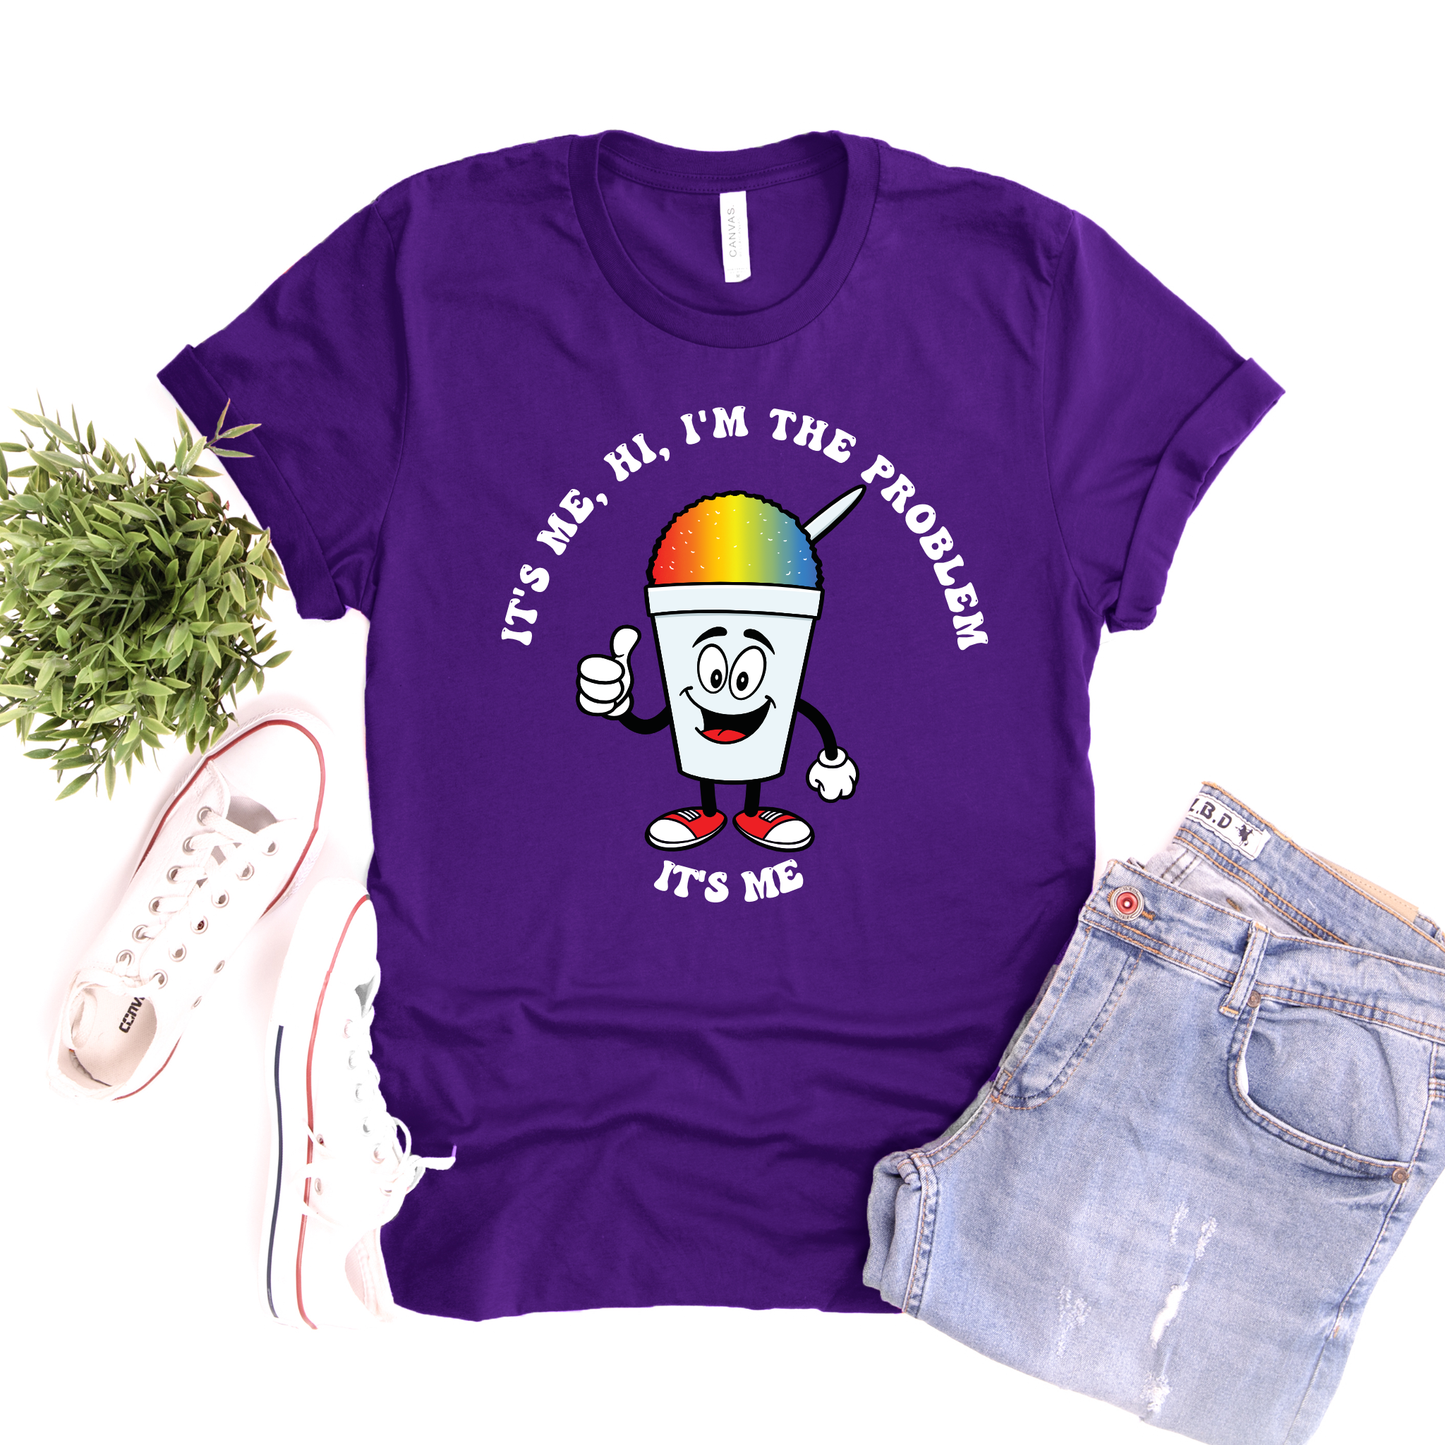 Snoball - I'm the Problem Tee - Toddler - Youth - Adult